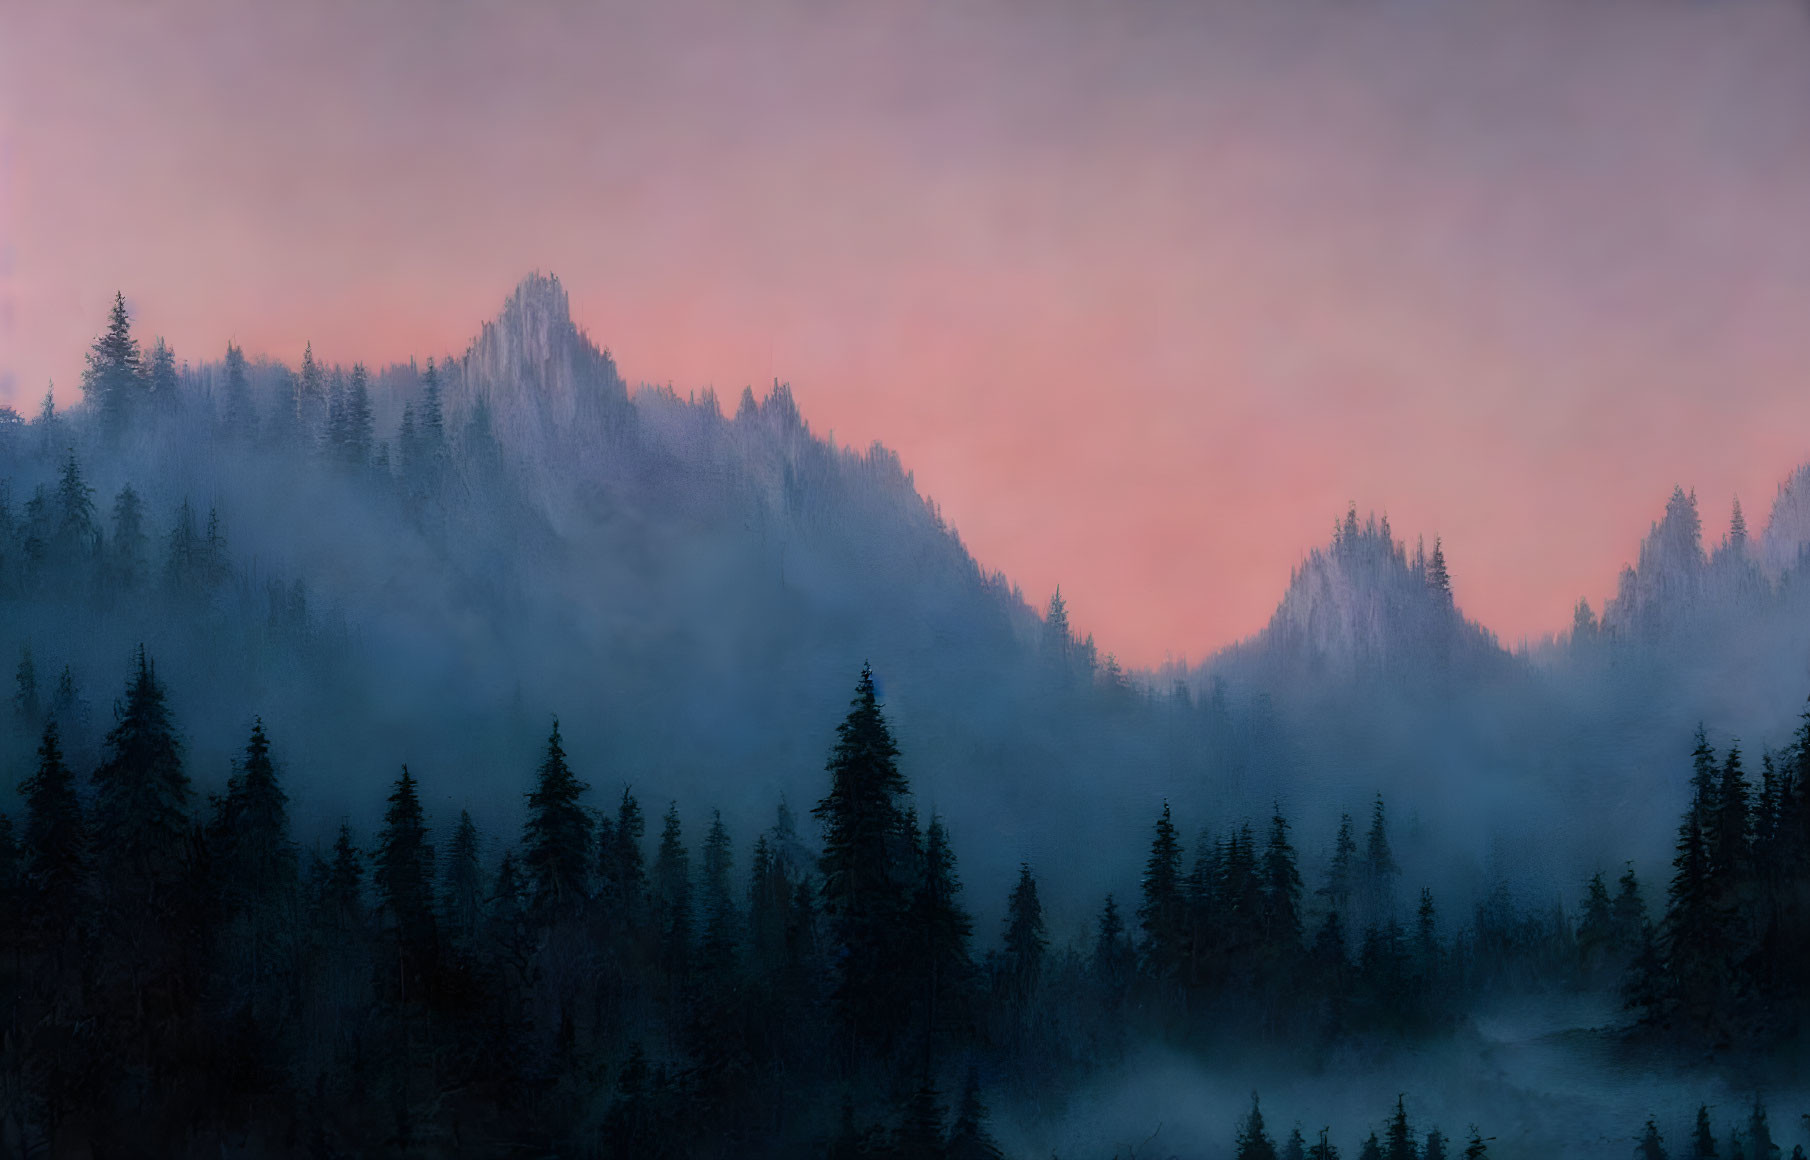 Twilight mountain landscape with mist, evergreen trees, and colorful sky